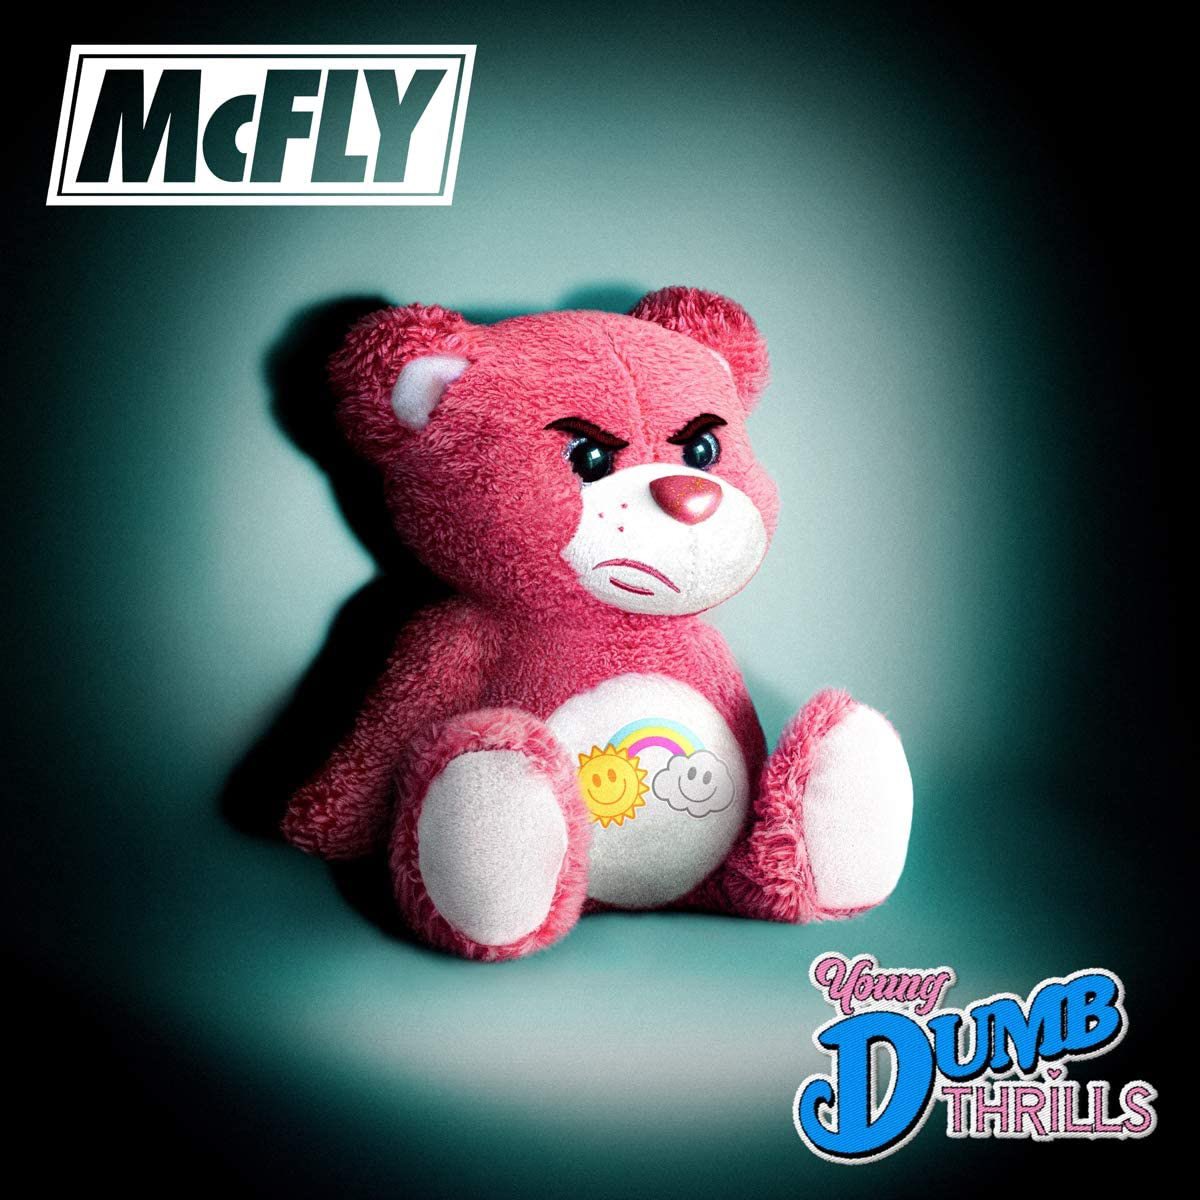 Huge congrats to @mcflymusic who enter the @officialcharts UK Album Chart at No.2!
#YoungDumbThrills is McFly’s highest charting album in 15 years. 🙌🏻

@TomFletcher @mcflyharry @itsDannyJones @DougiePoynter